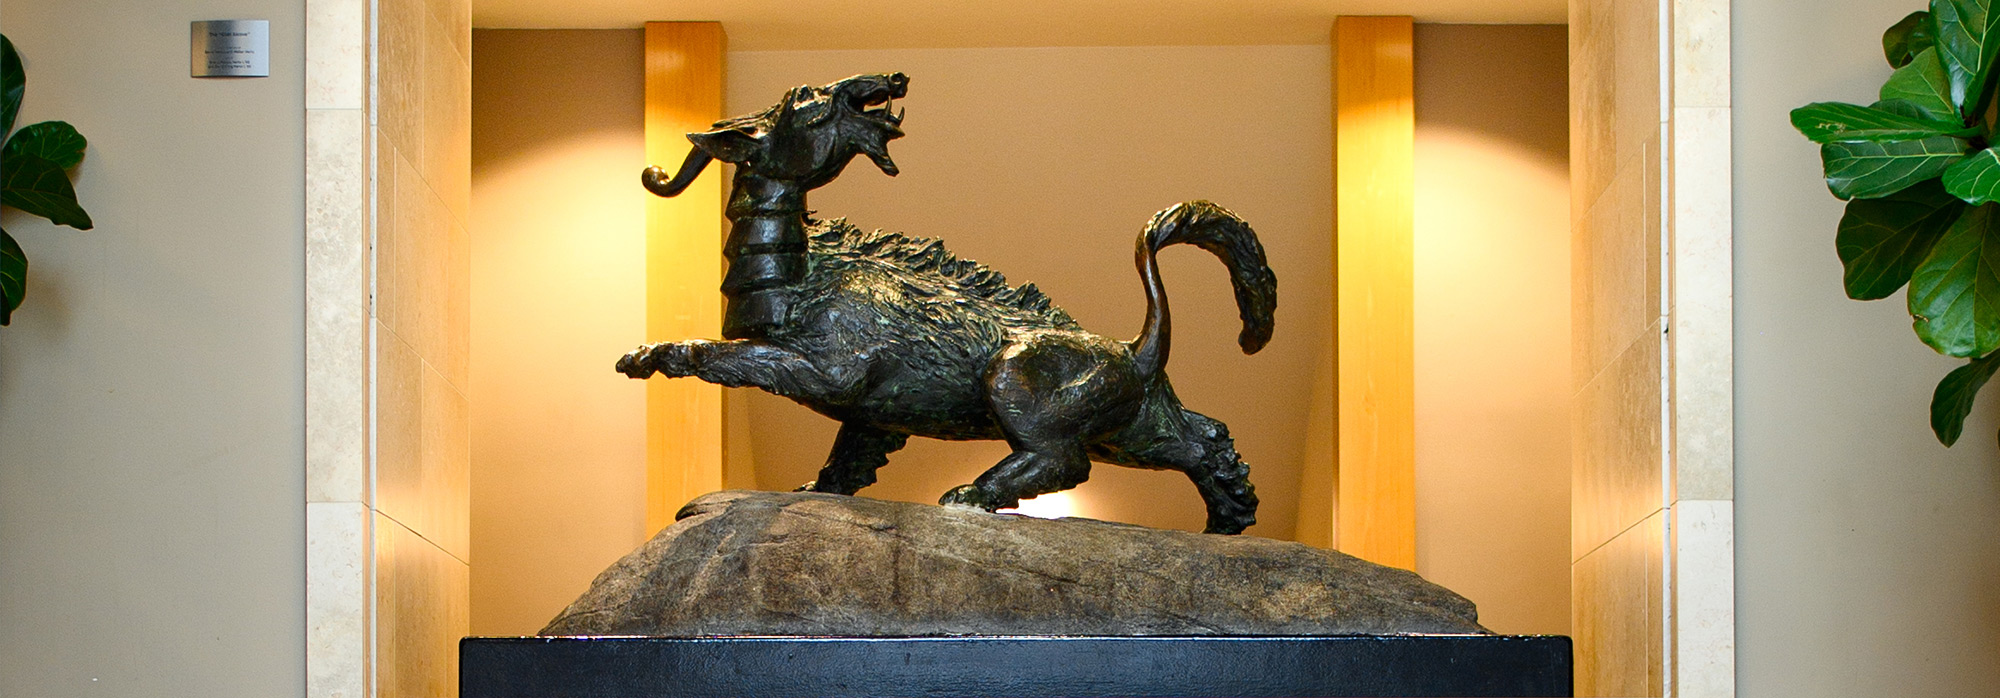 A landscape photograph of the Hsieh-chai (affectionally known as "The Goat") bronze sculpture located within a Penn Carey Law school building where it is a popular meeting spot for all people to mingle and connect with each other